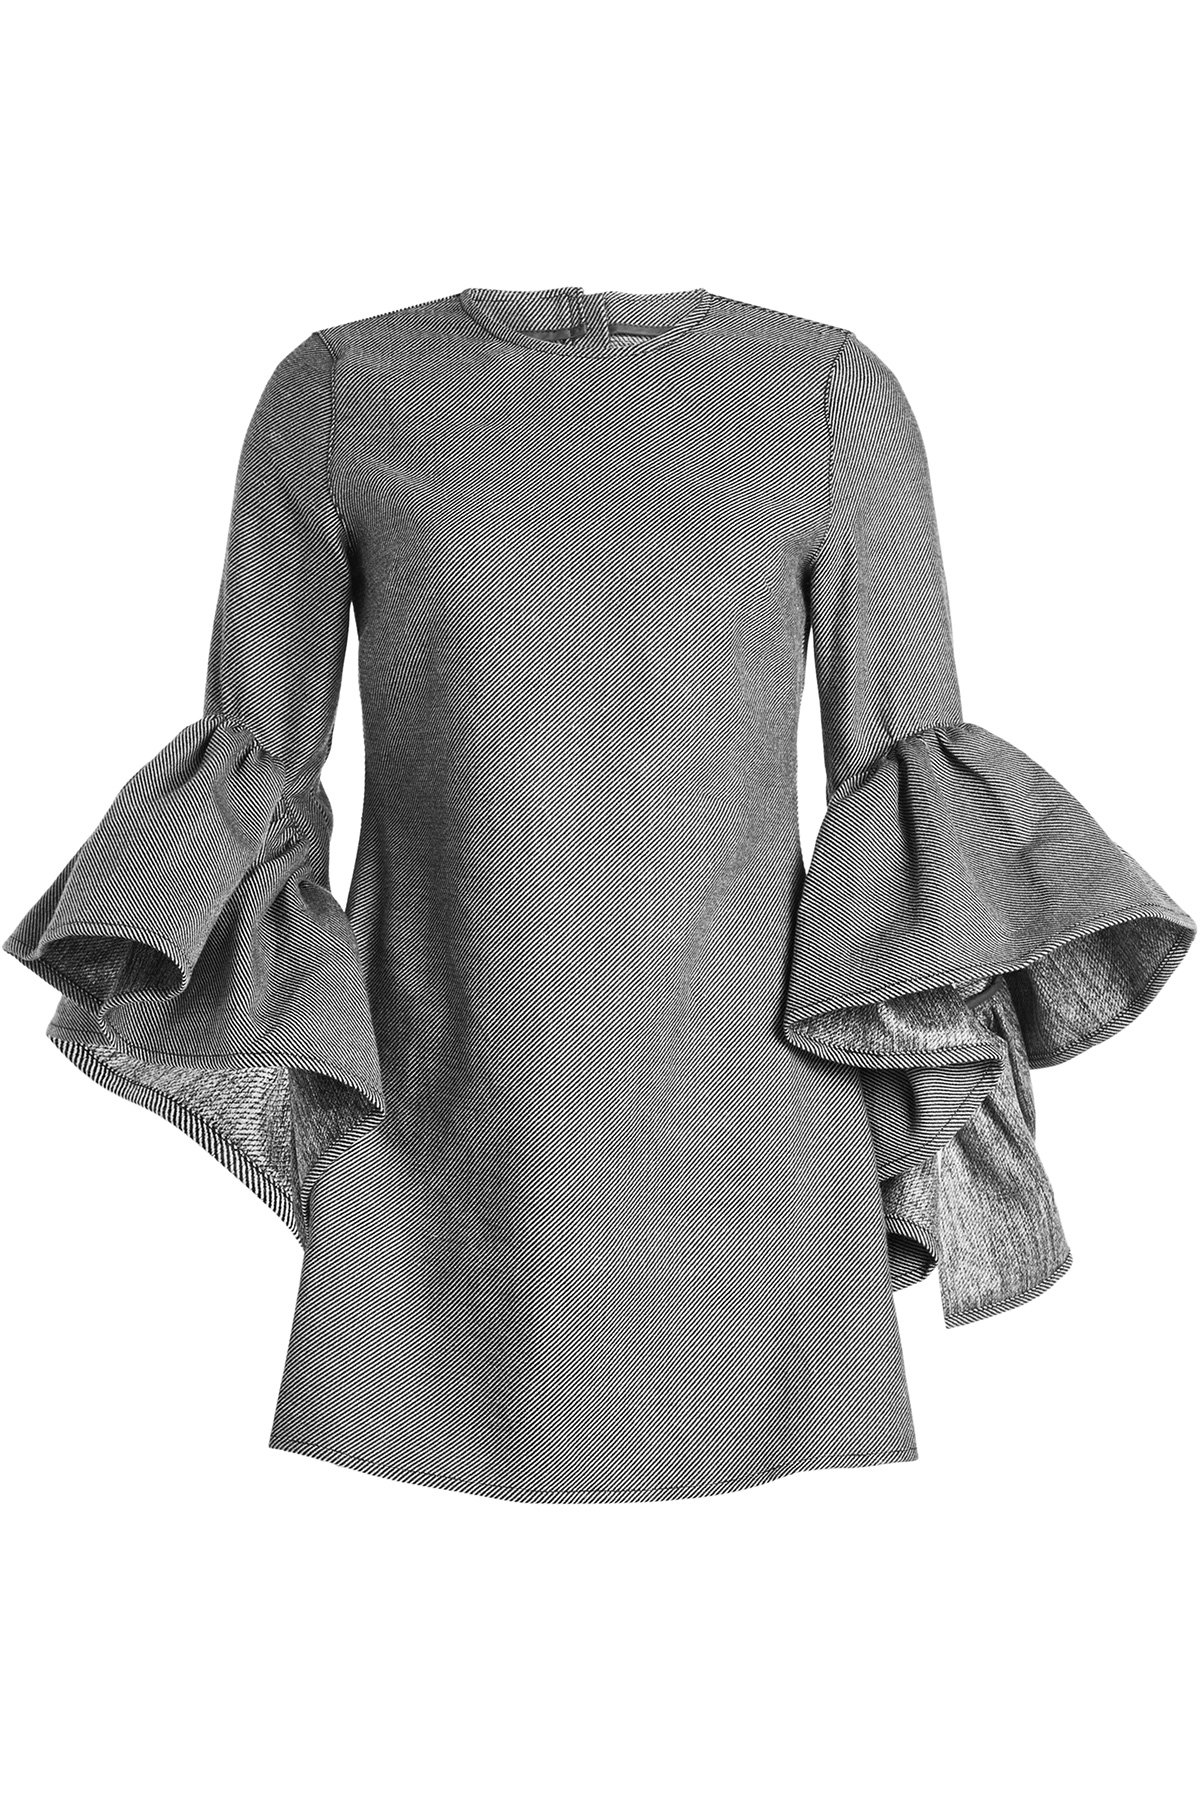 Twill Dress with Voluminous Sleeves by Marques' Almeida